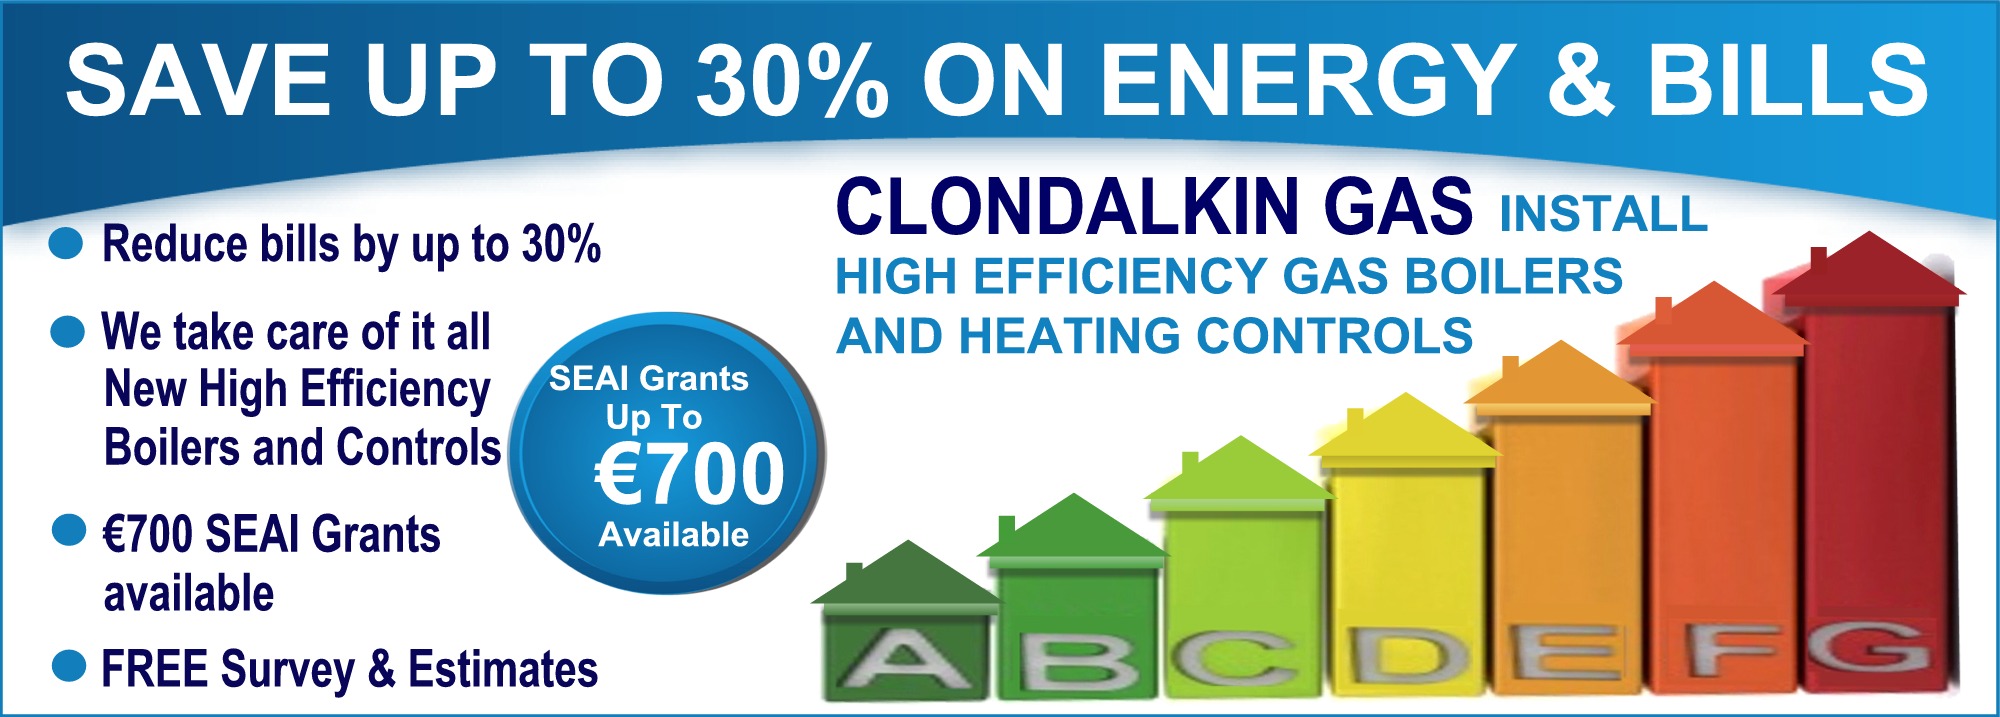 SAVE UP TO 30% ON ENERGY & BILLS  Clondalkin Gas install High Efficiency Gas Boilers and Heating Controls. We take care of it all, €700 SEAI grants available, free survey & estimates